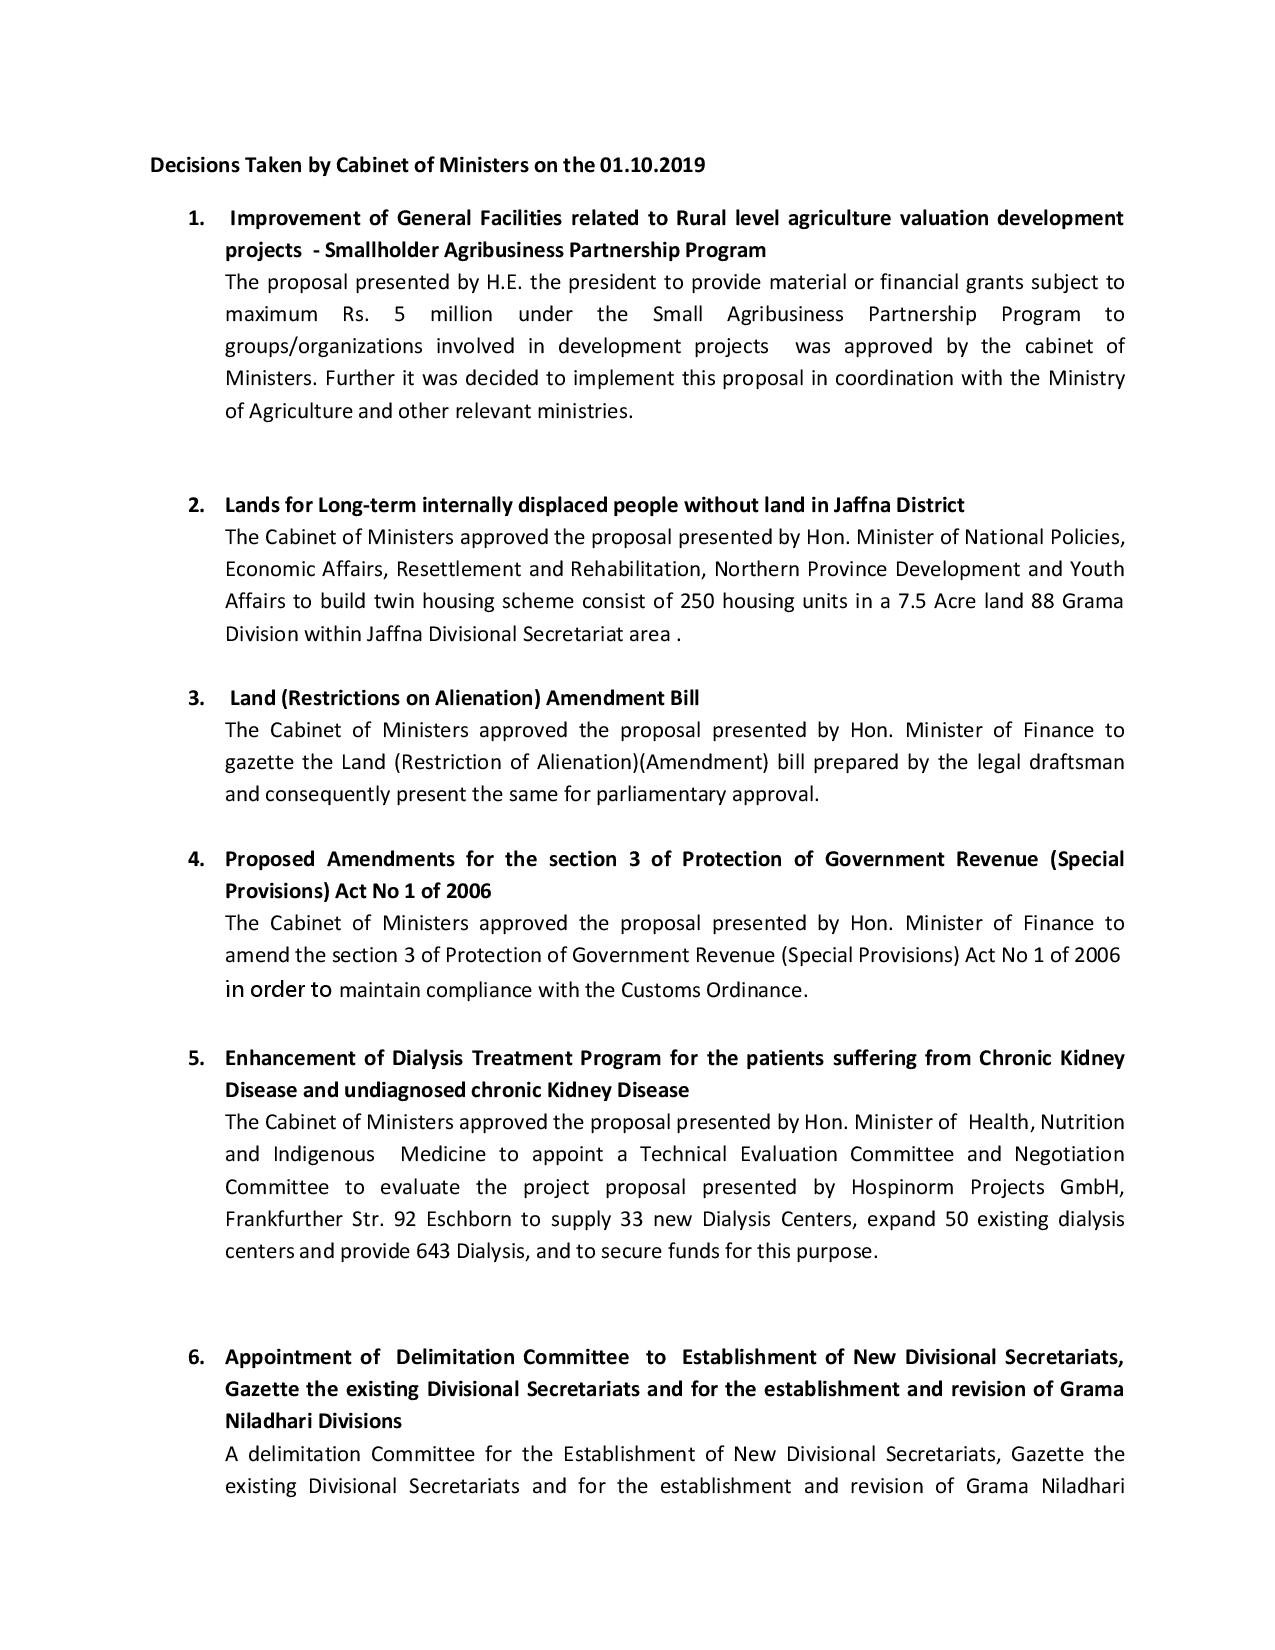 Decisions Taken by Cabinet of Ministers on theE 01.10.2019 page 001